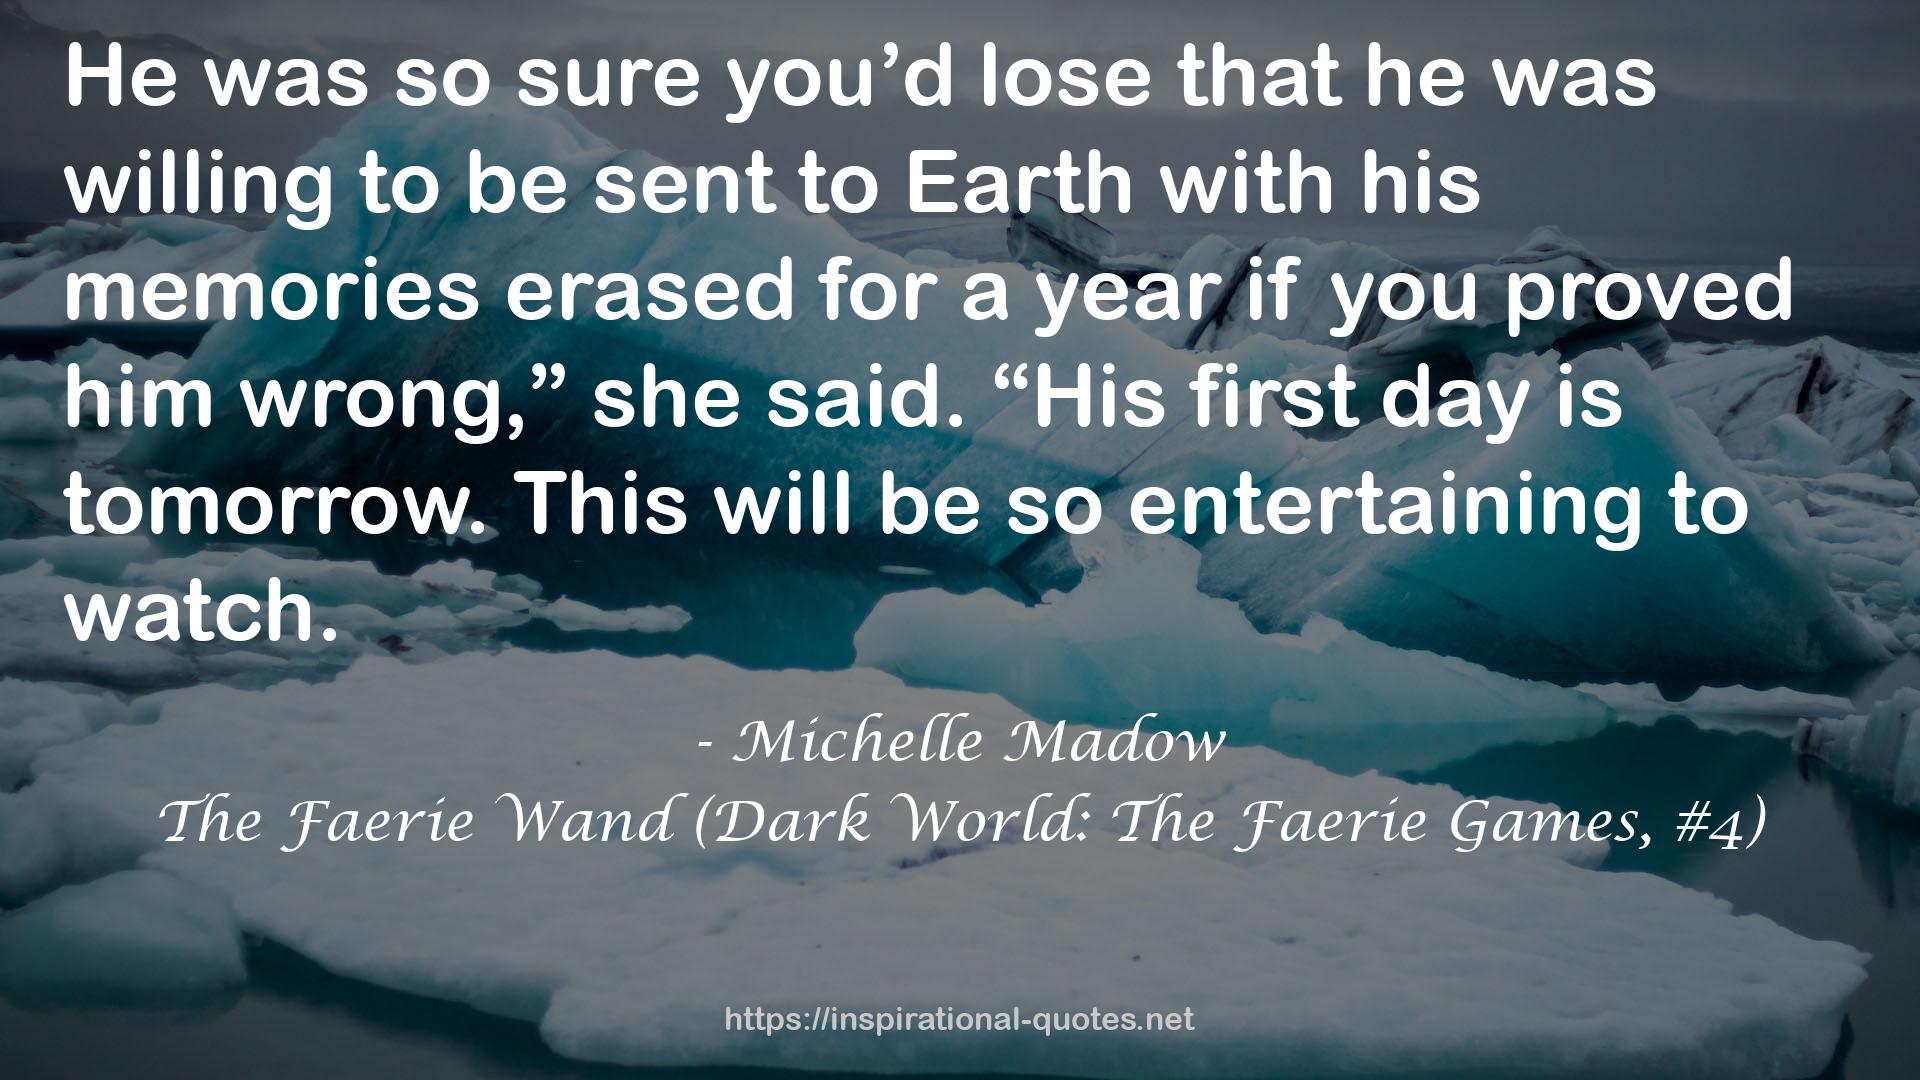 The Faerie Wand (Dark World: The Faerie Games, #4) QUOTES